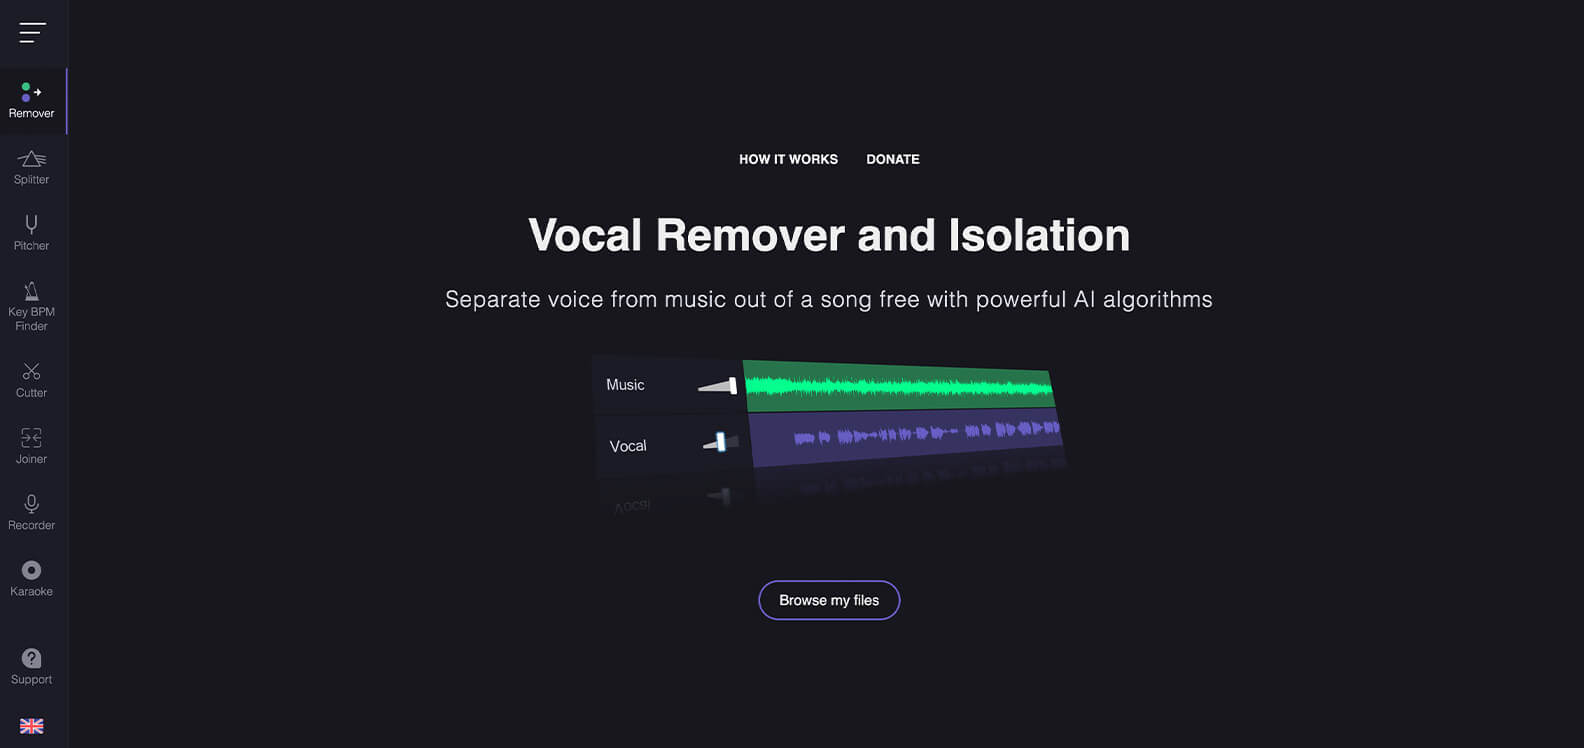 Vocal Remover